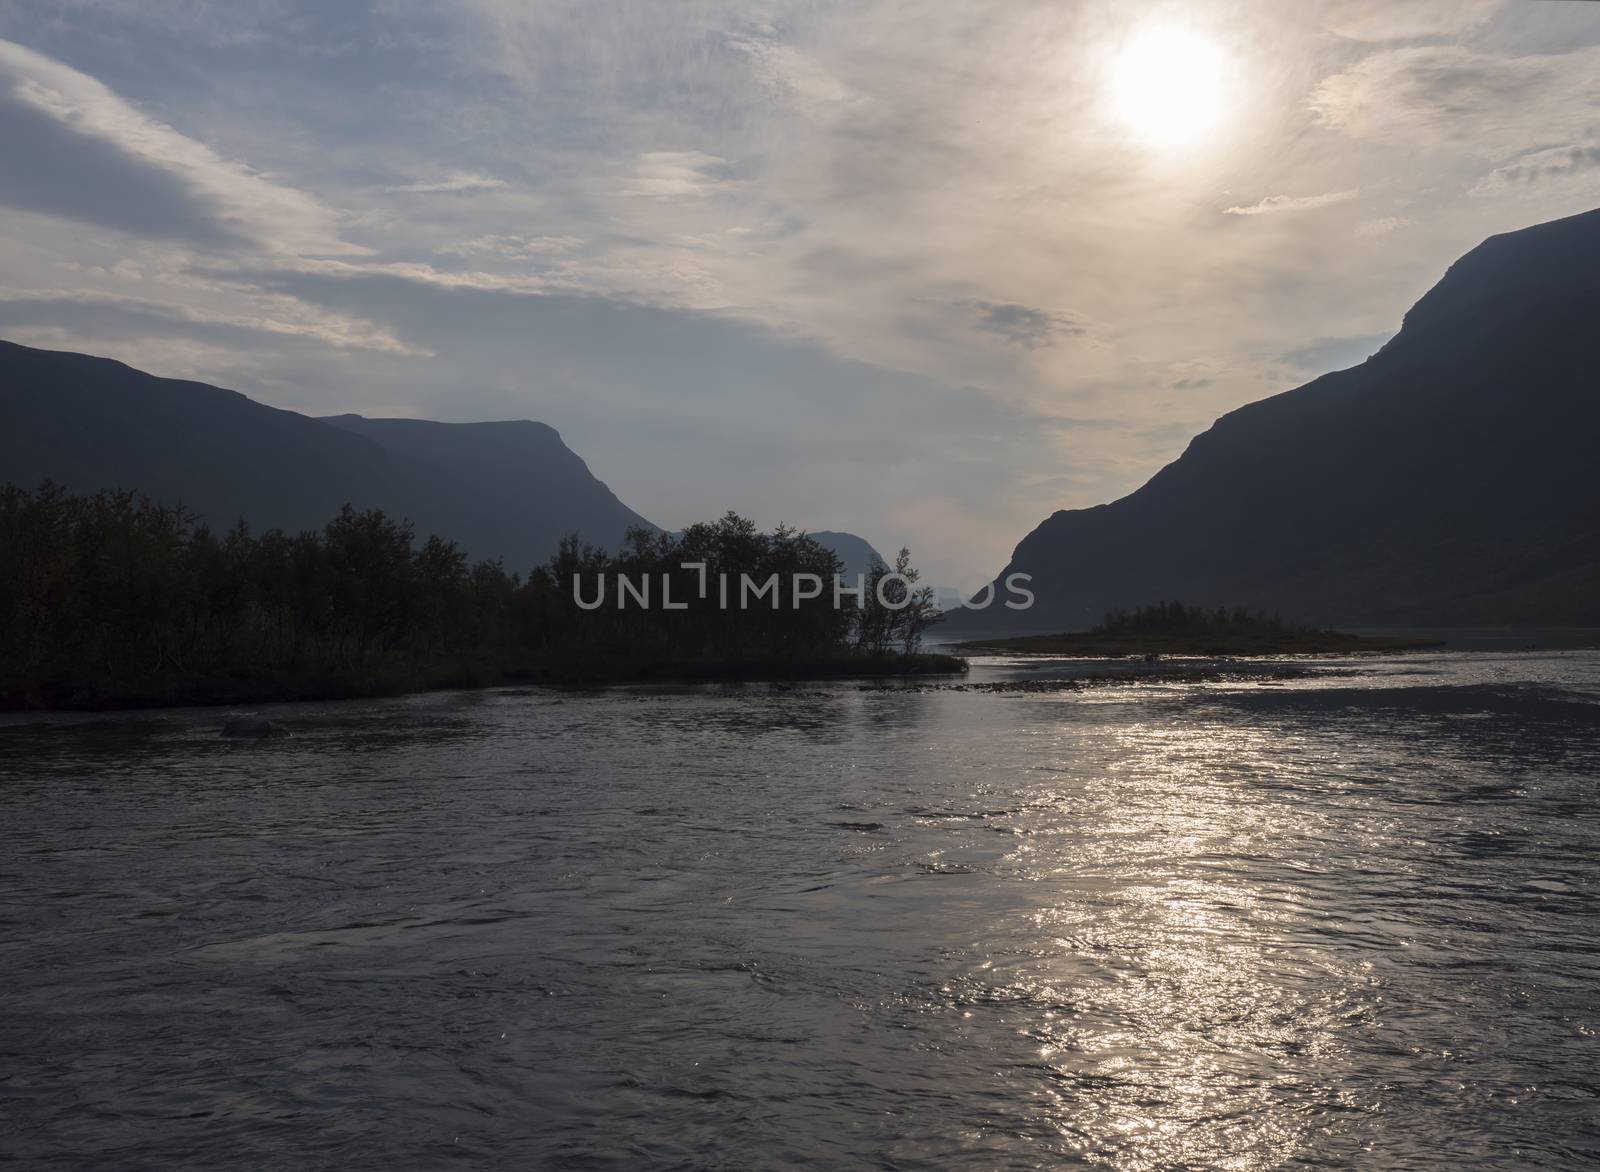 Confluence of wild Tjaktjajakka river and Kaitumjaure lake with small birch tree forest island and mountains. Lapland nature landscape, summer sunset at Kungsleden hiking trail